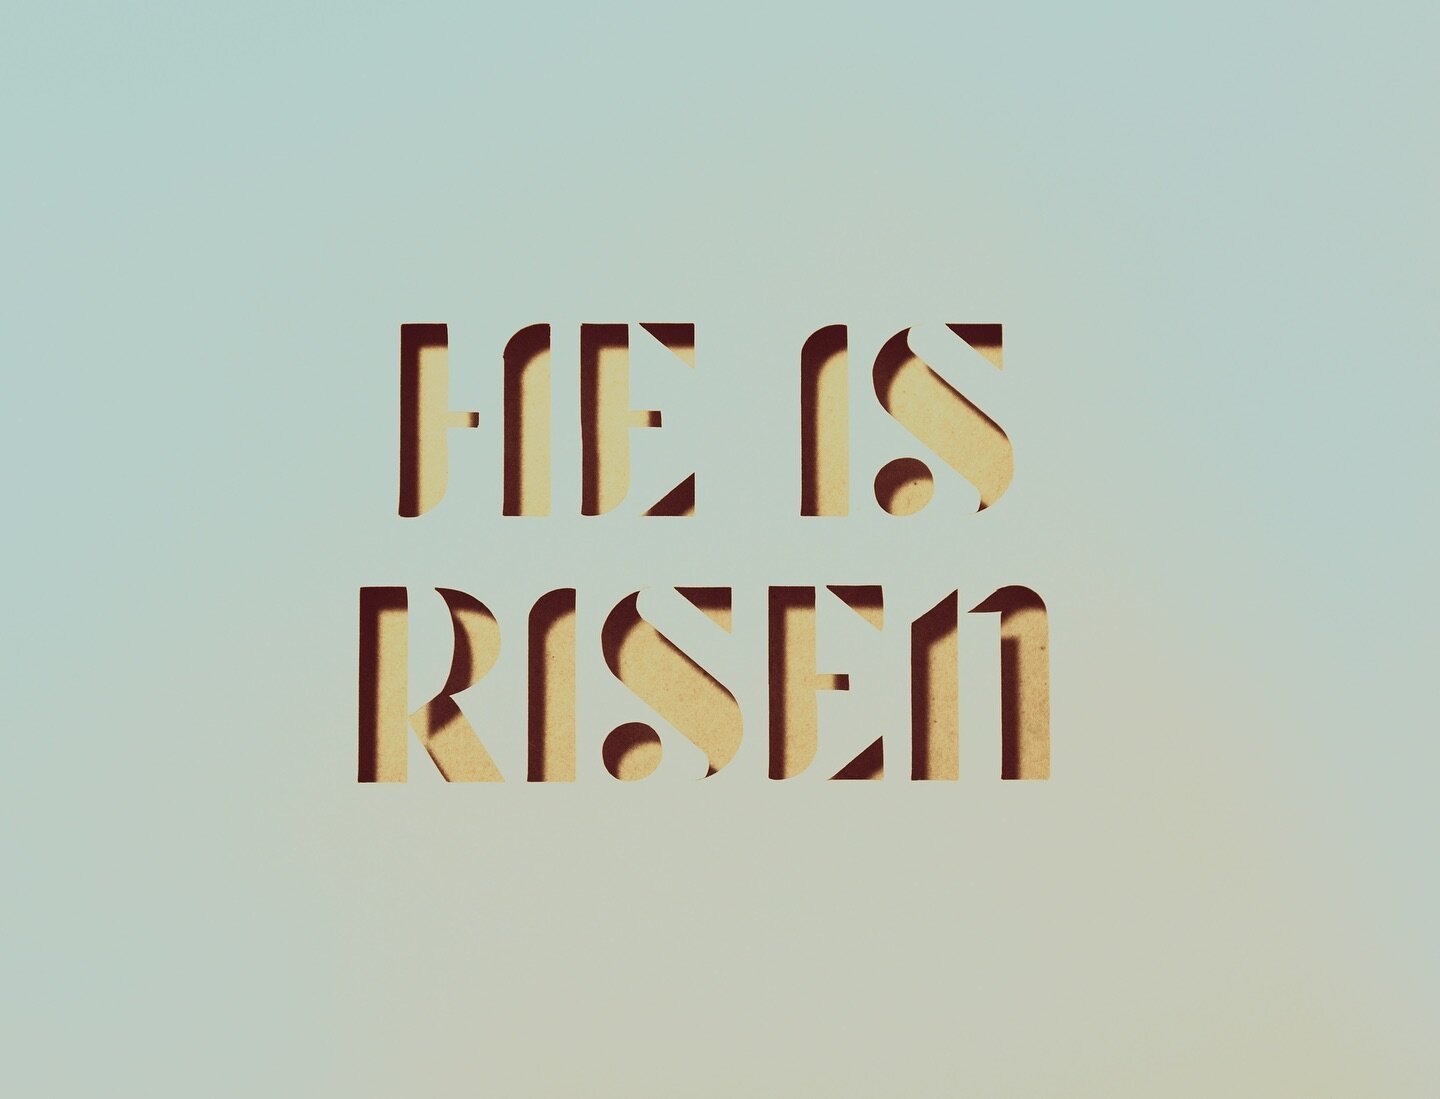 Rejoice! Today, we celebrate the triumph of life over death, as Jesus rises victorious from the grave. His resurrection brings hope, renewal, and the promise of eternal life for all who believe. 

Happy Easter Sunday, may His light shine brightly in 